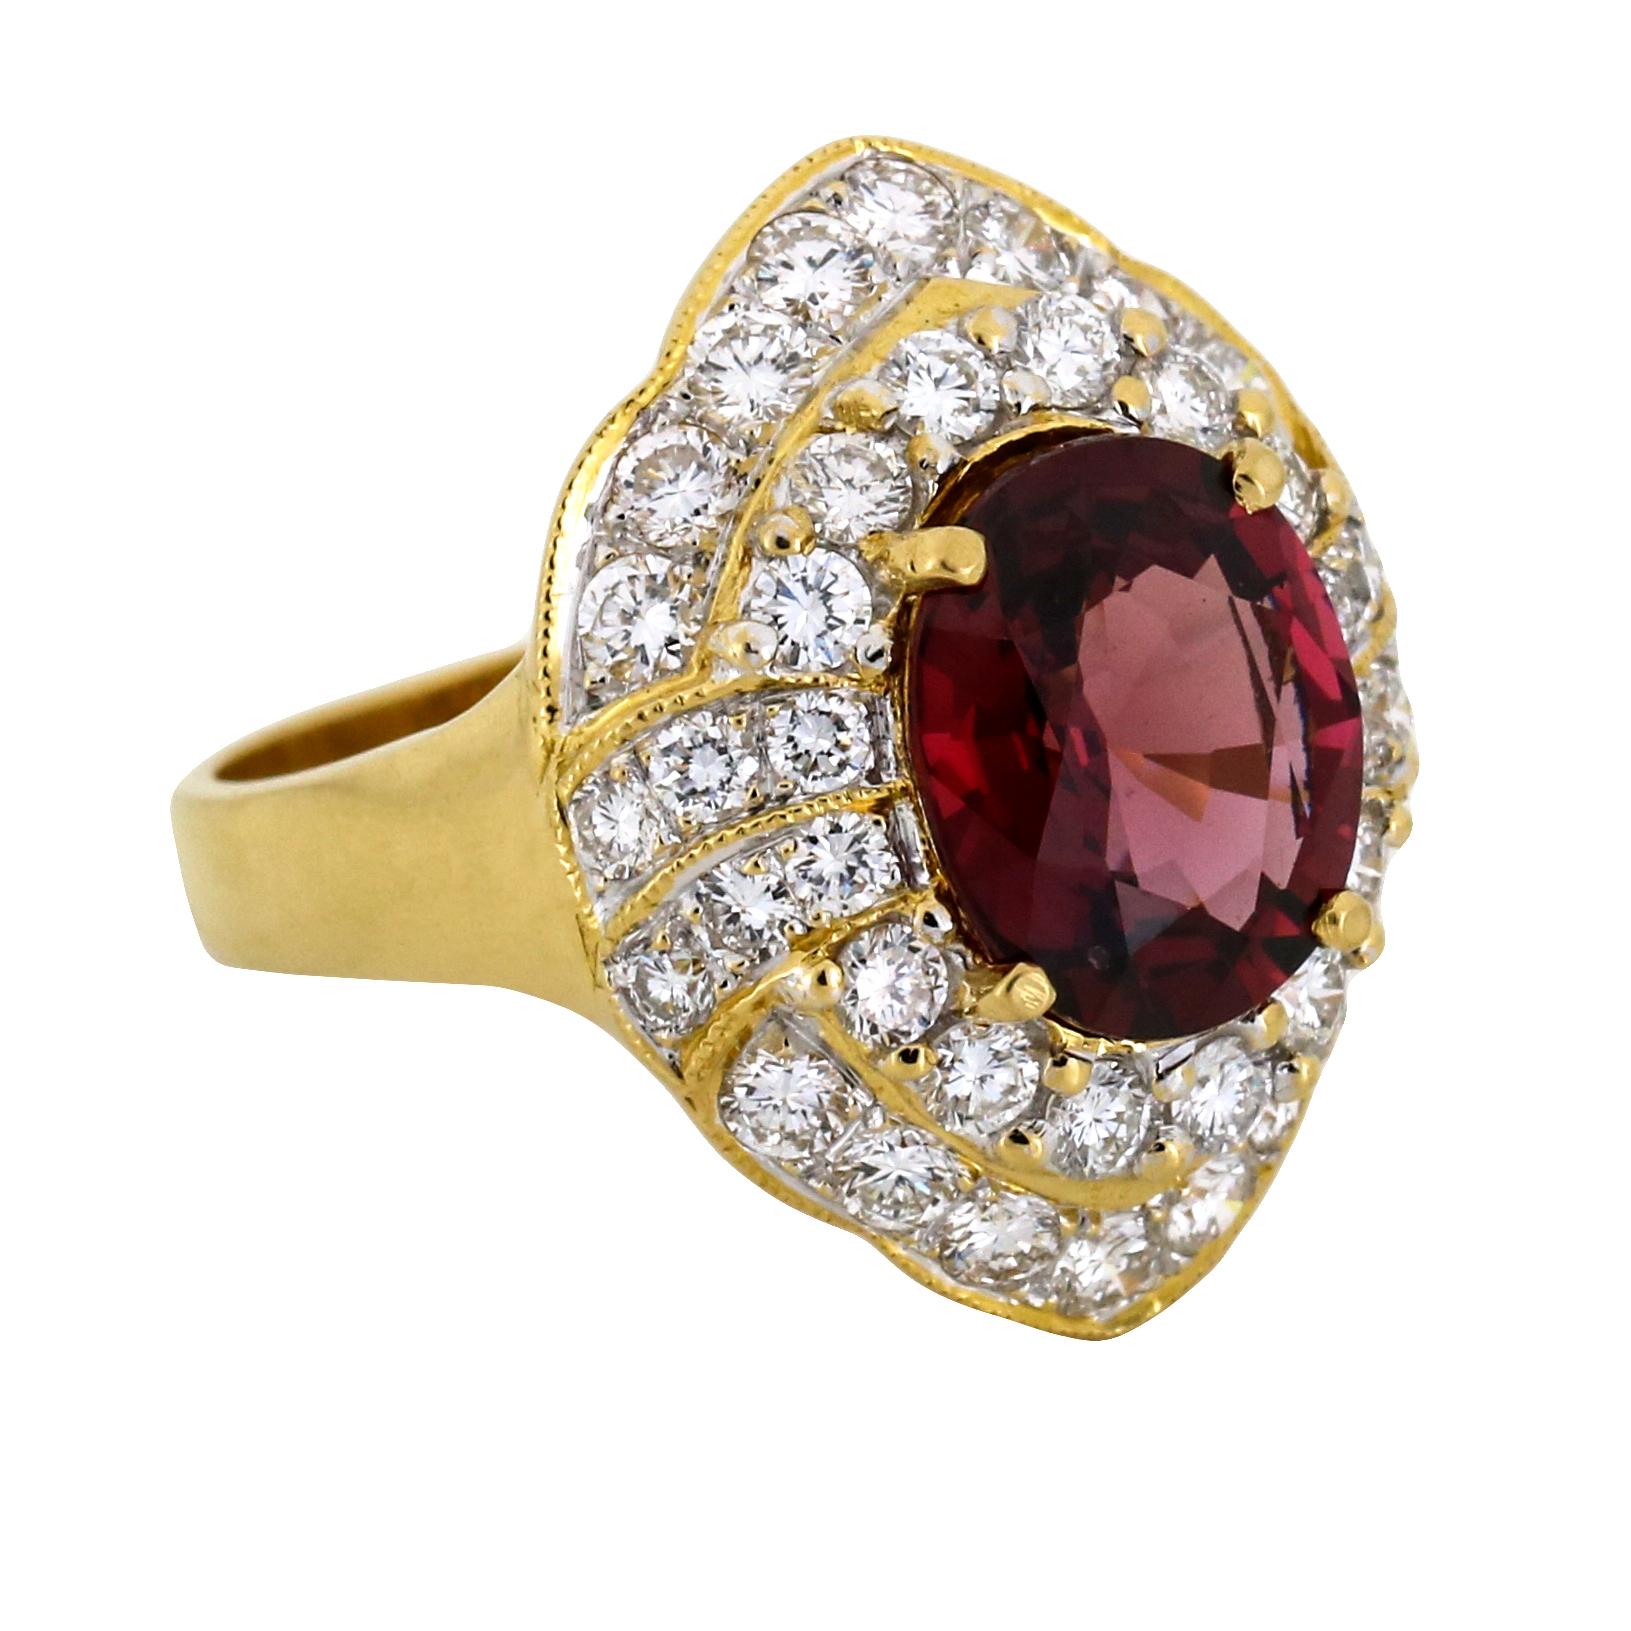 Contemporary GIA 3.25 Carat Red Spinel Diamond Cocktail Ring in 18 Karat Yellow Gold For Sale